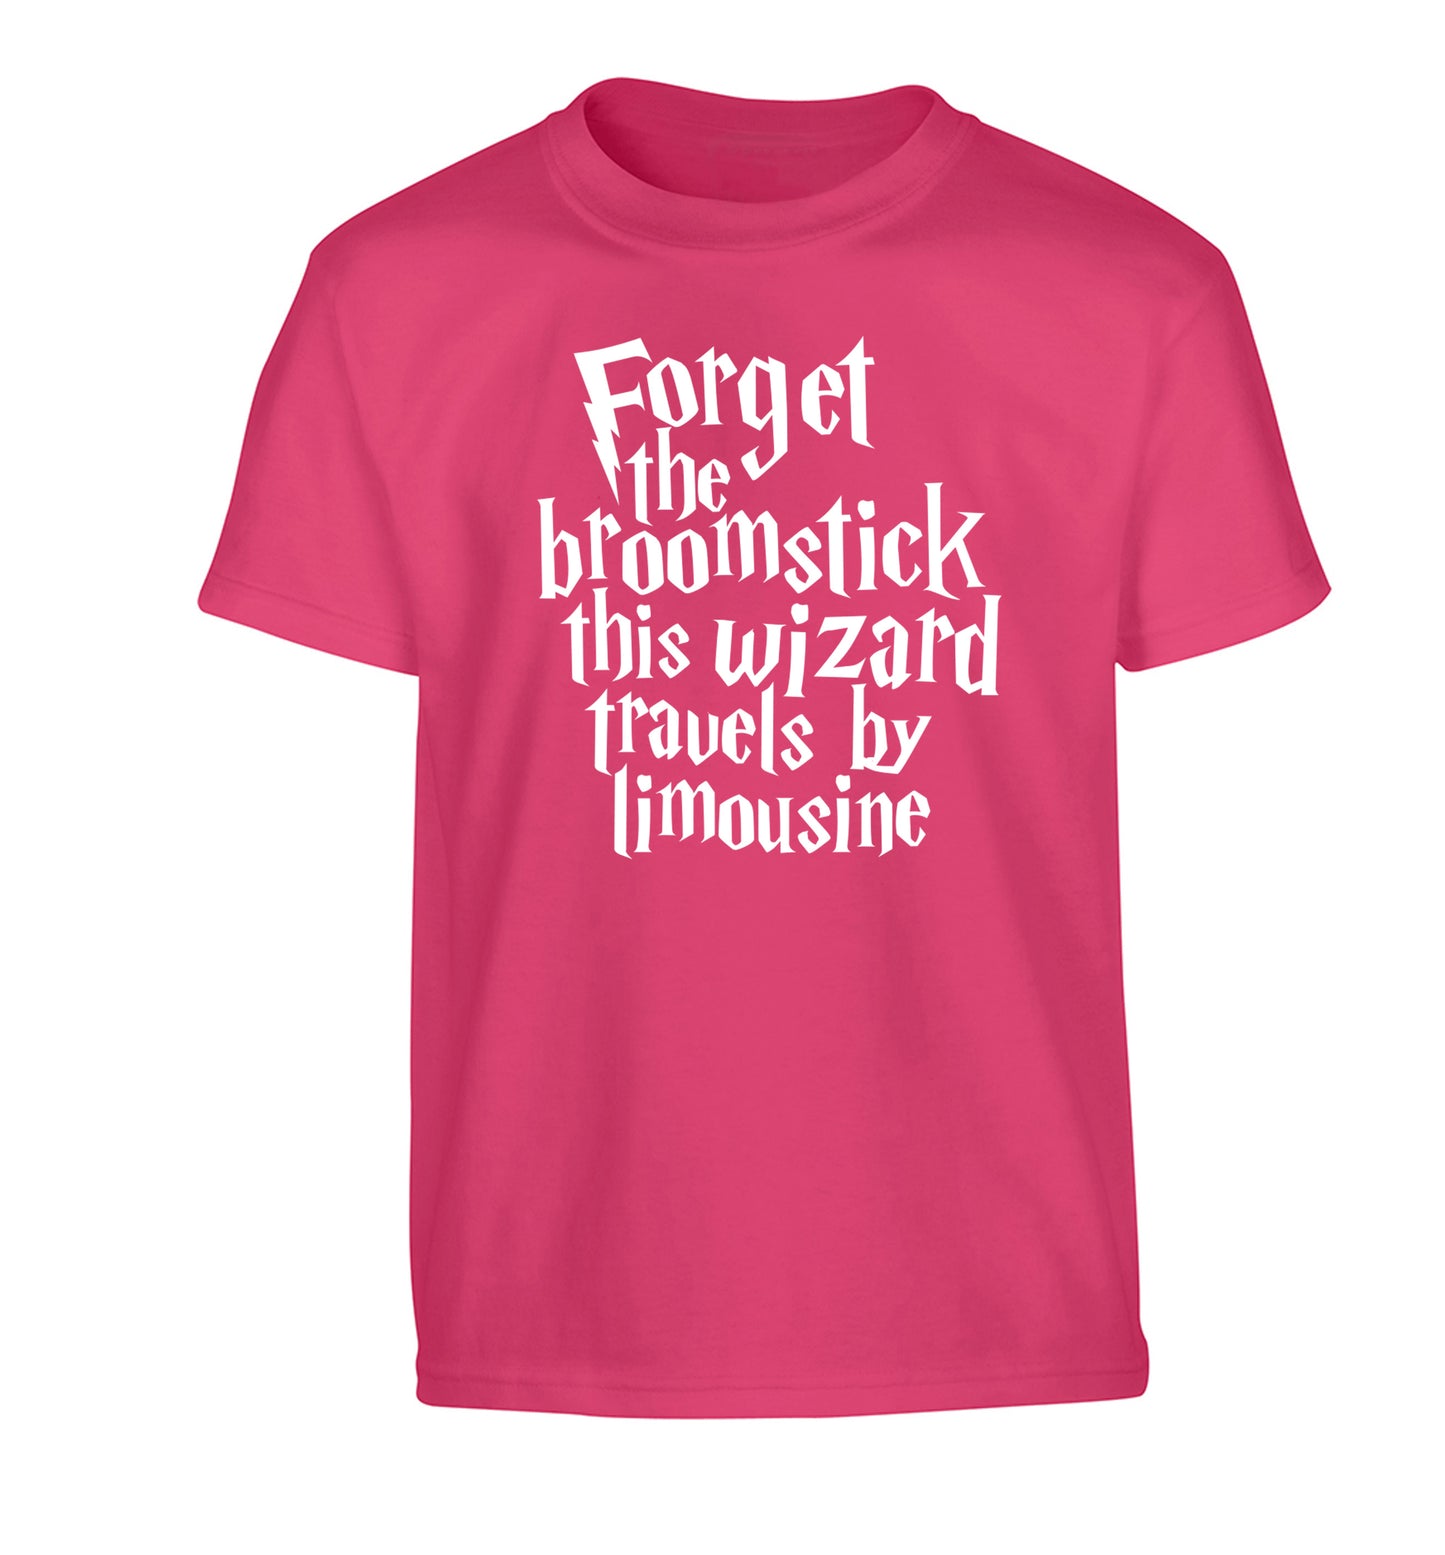 Forget the broomstick this wizard travels by limousine Children's pink Tshirt 12-14 Years